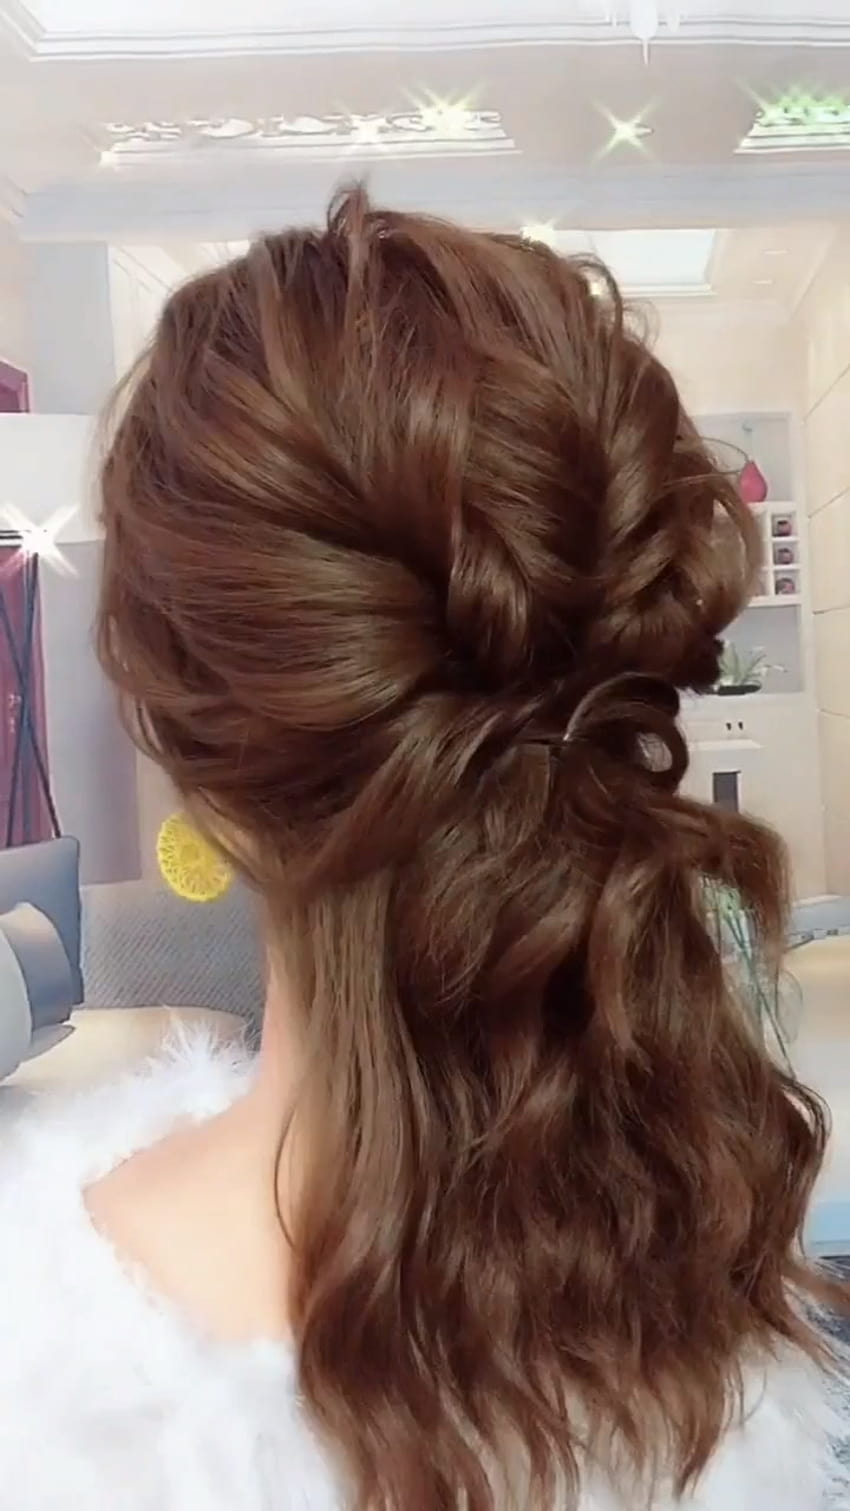 New Low Messy Bun. Bridal Hairstyle For Long Hair. Wedding Updo Tutorial -  YouTube